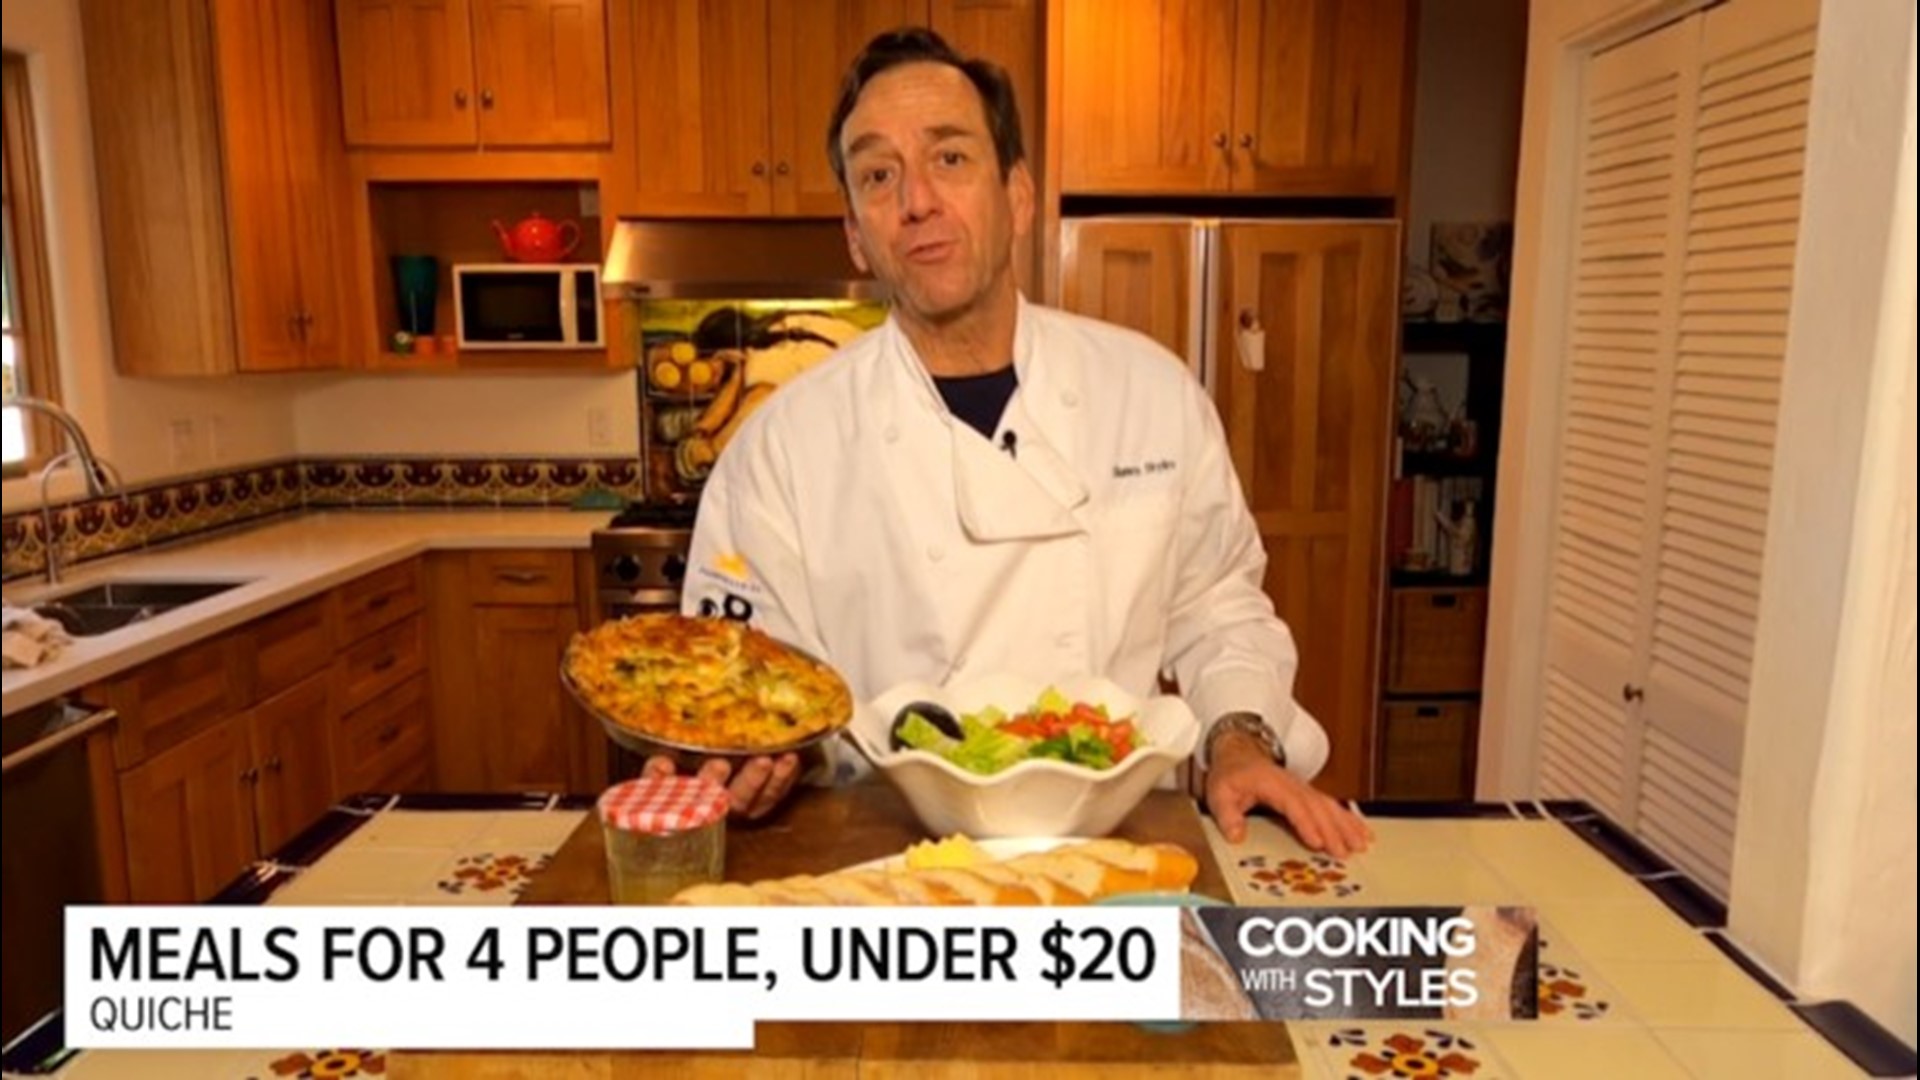 While you look to save money, it doesn't mean you have to sacrifice your dinner. KFMB'S Shawn Styles shows you six different recipes for four people, all under $20.